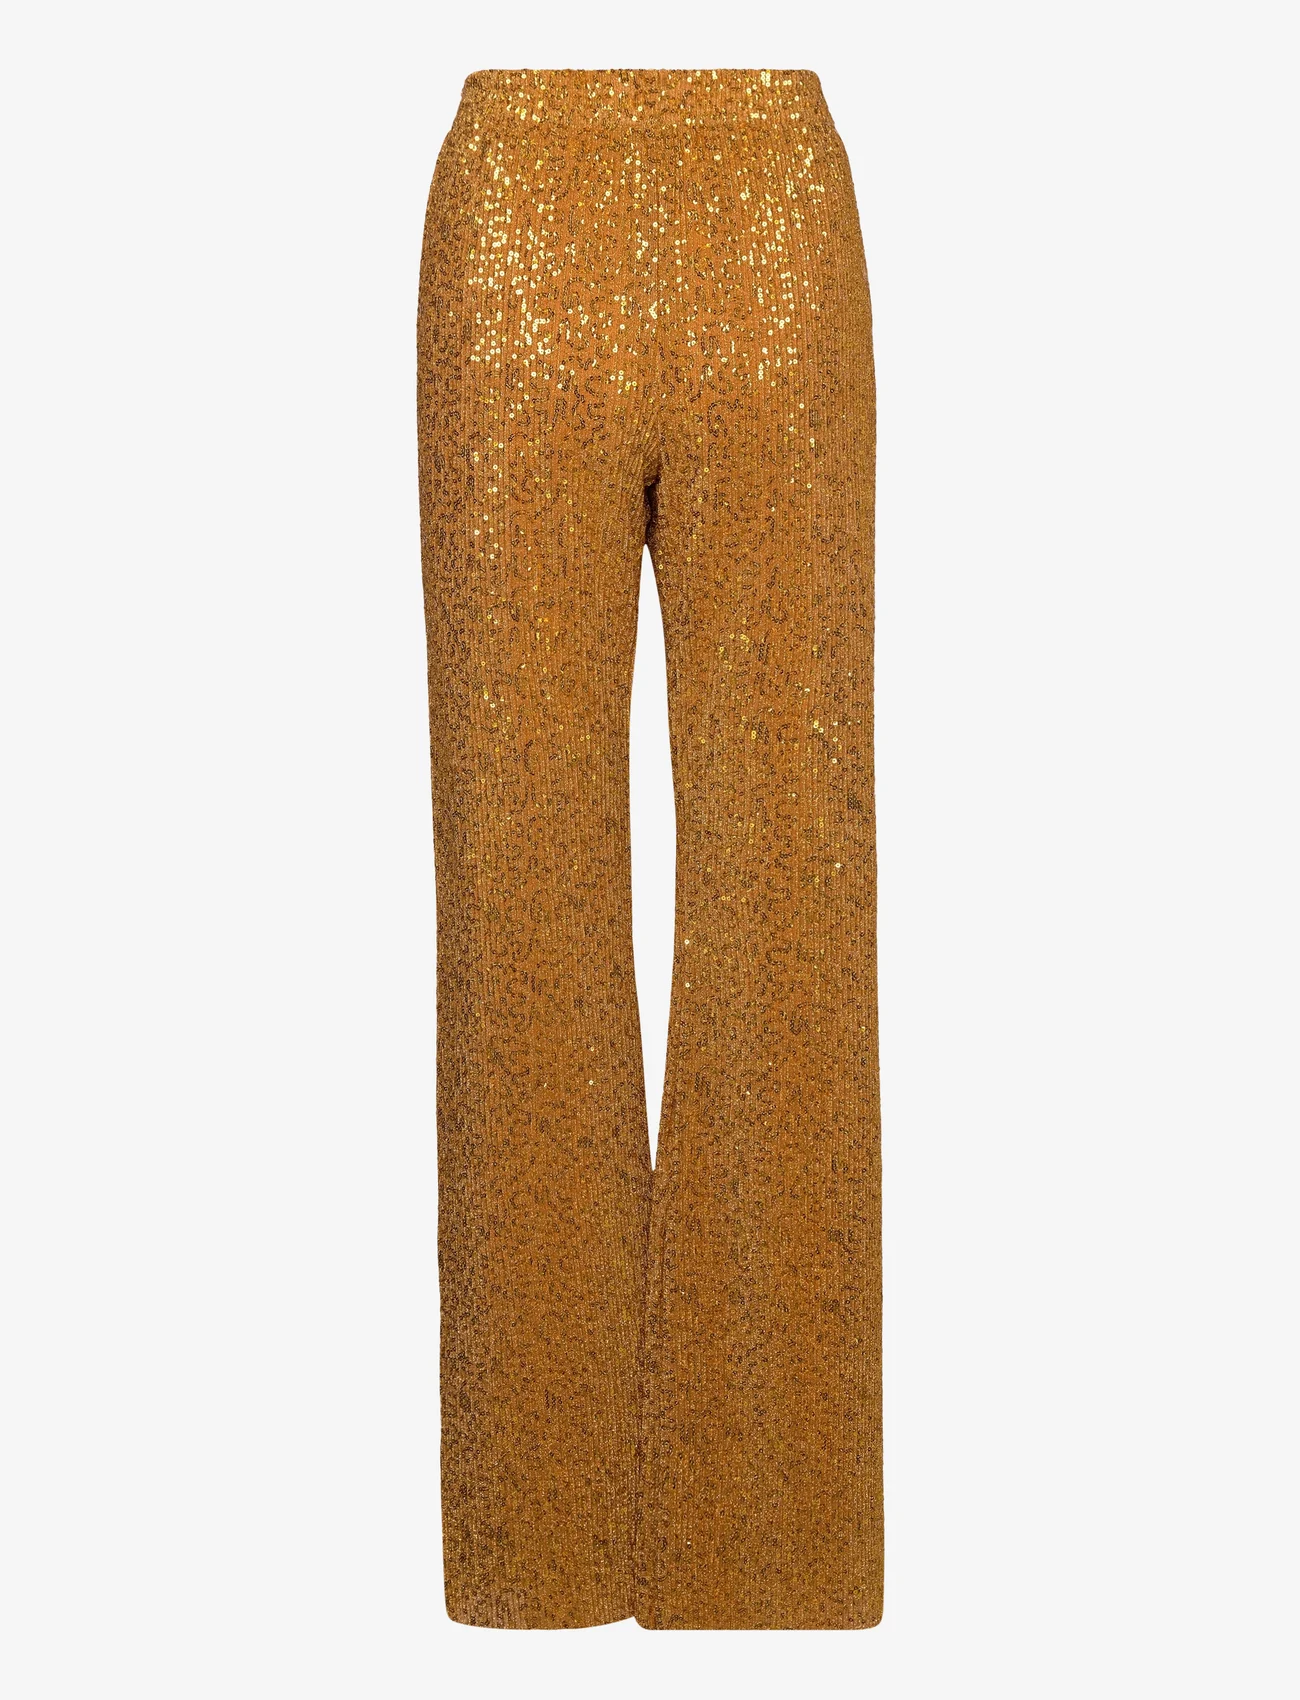 STINE GOYA - Markus, 1829 Sequins Jersey - trousers - gold - 1